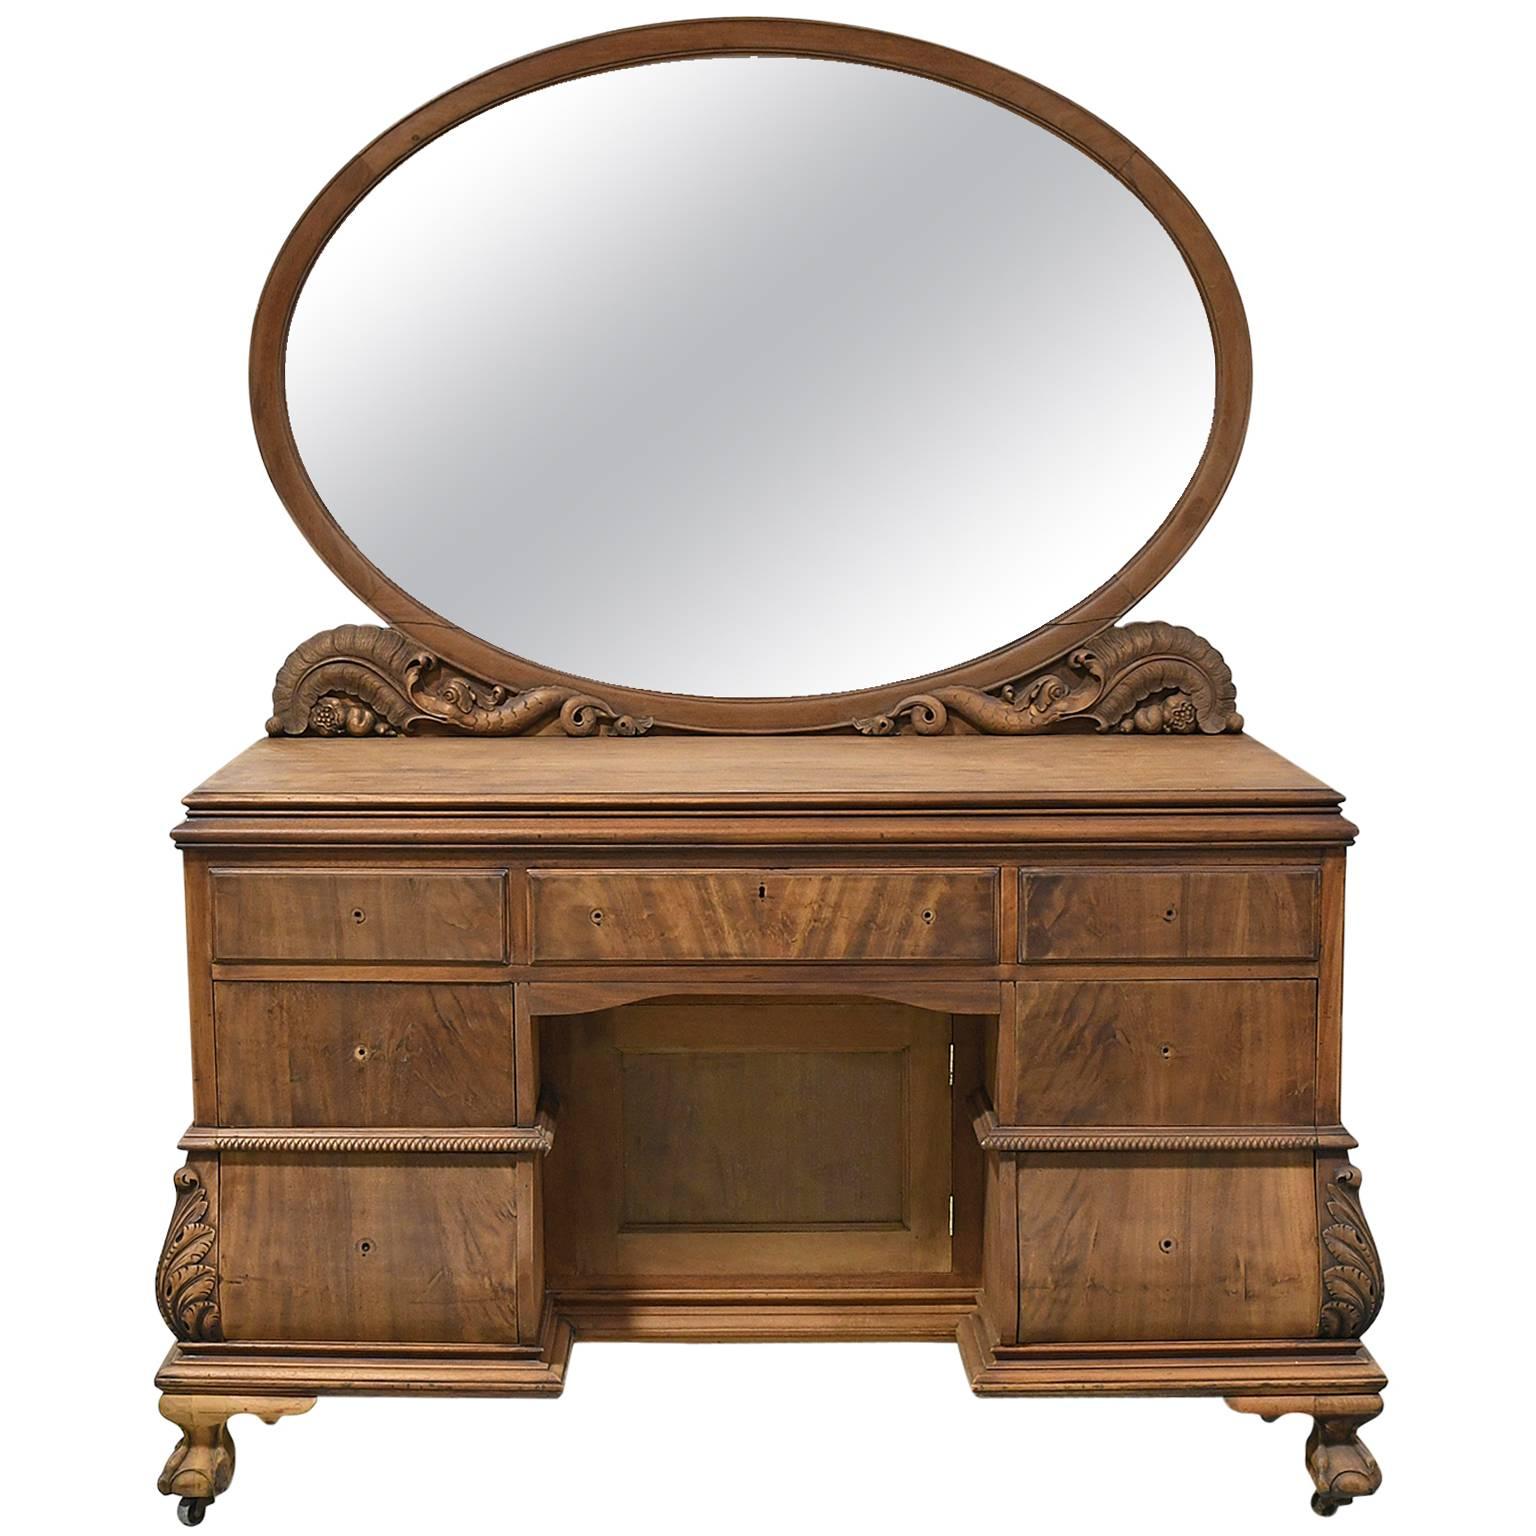 Belle Epoque Dressing Table in Mahogany with Oval Mirror with Carved Supports